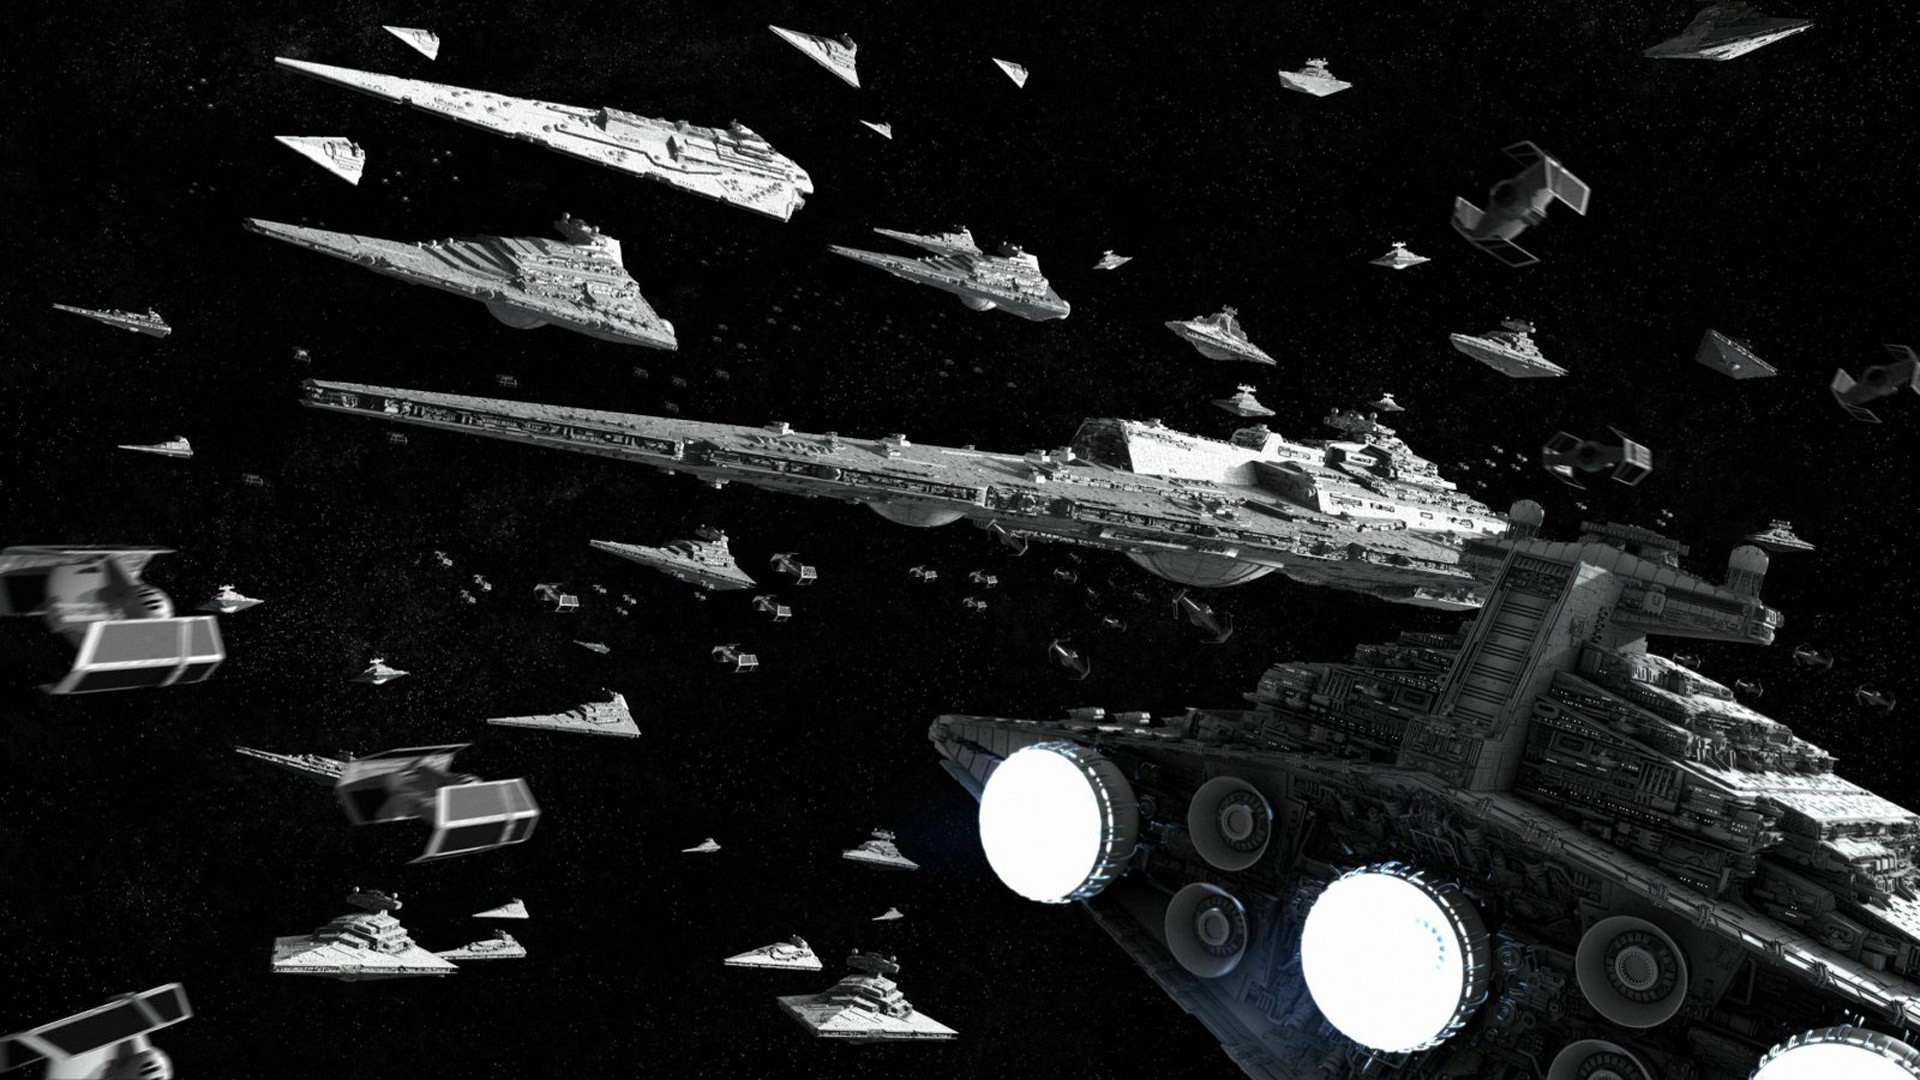 Star Wars outer space spaceships Galactic Empire wallpaper 1920x1080